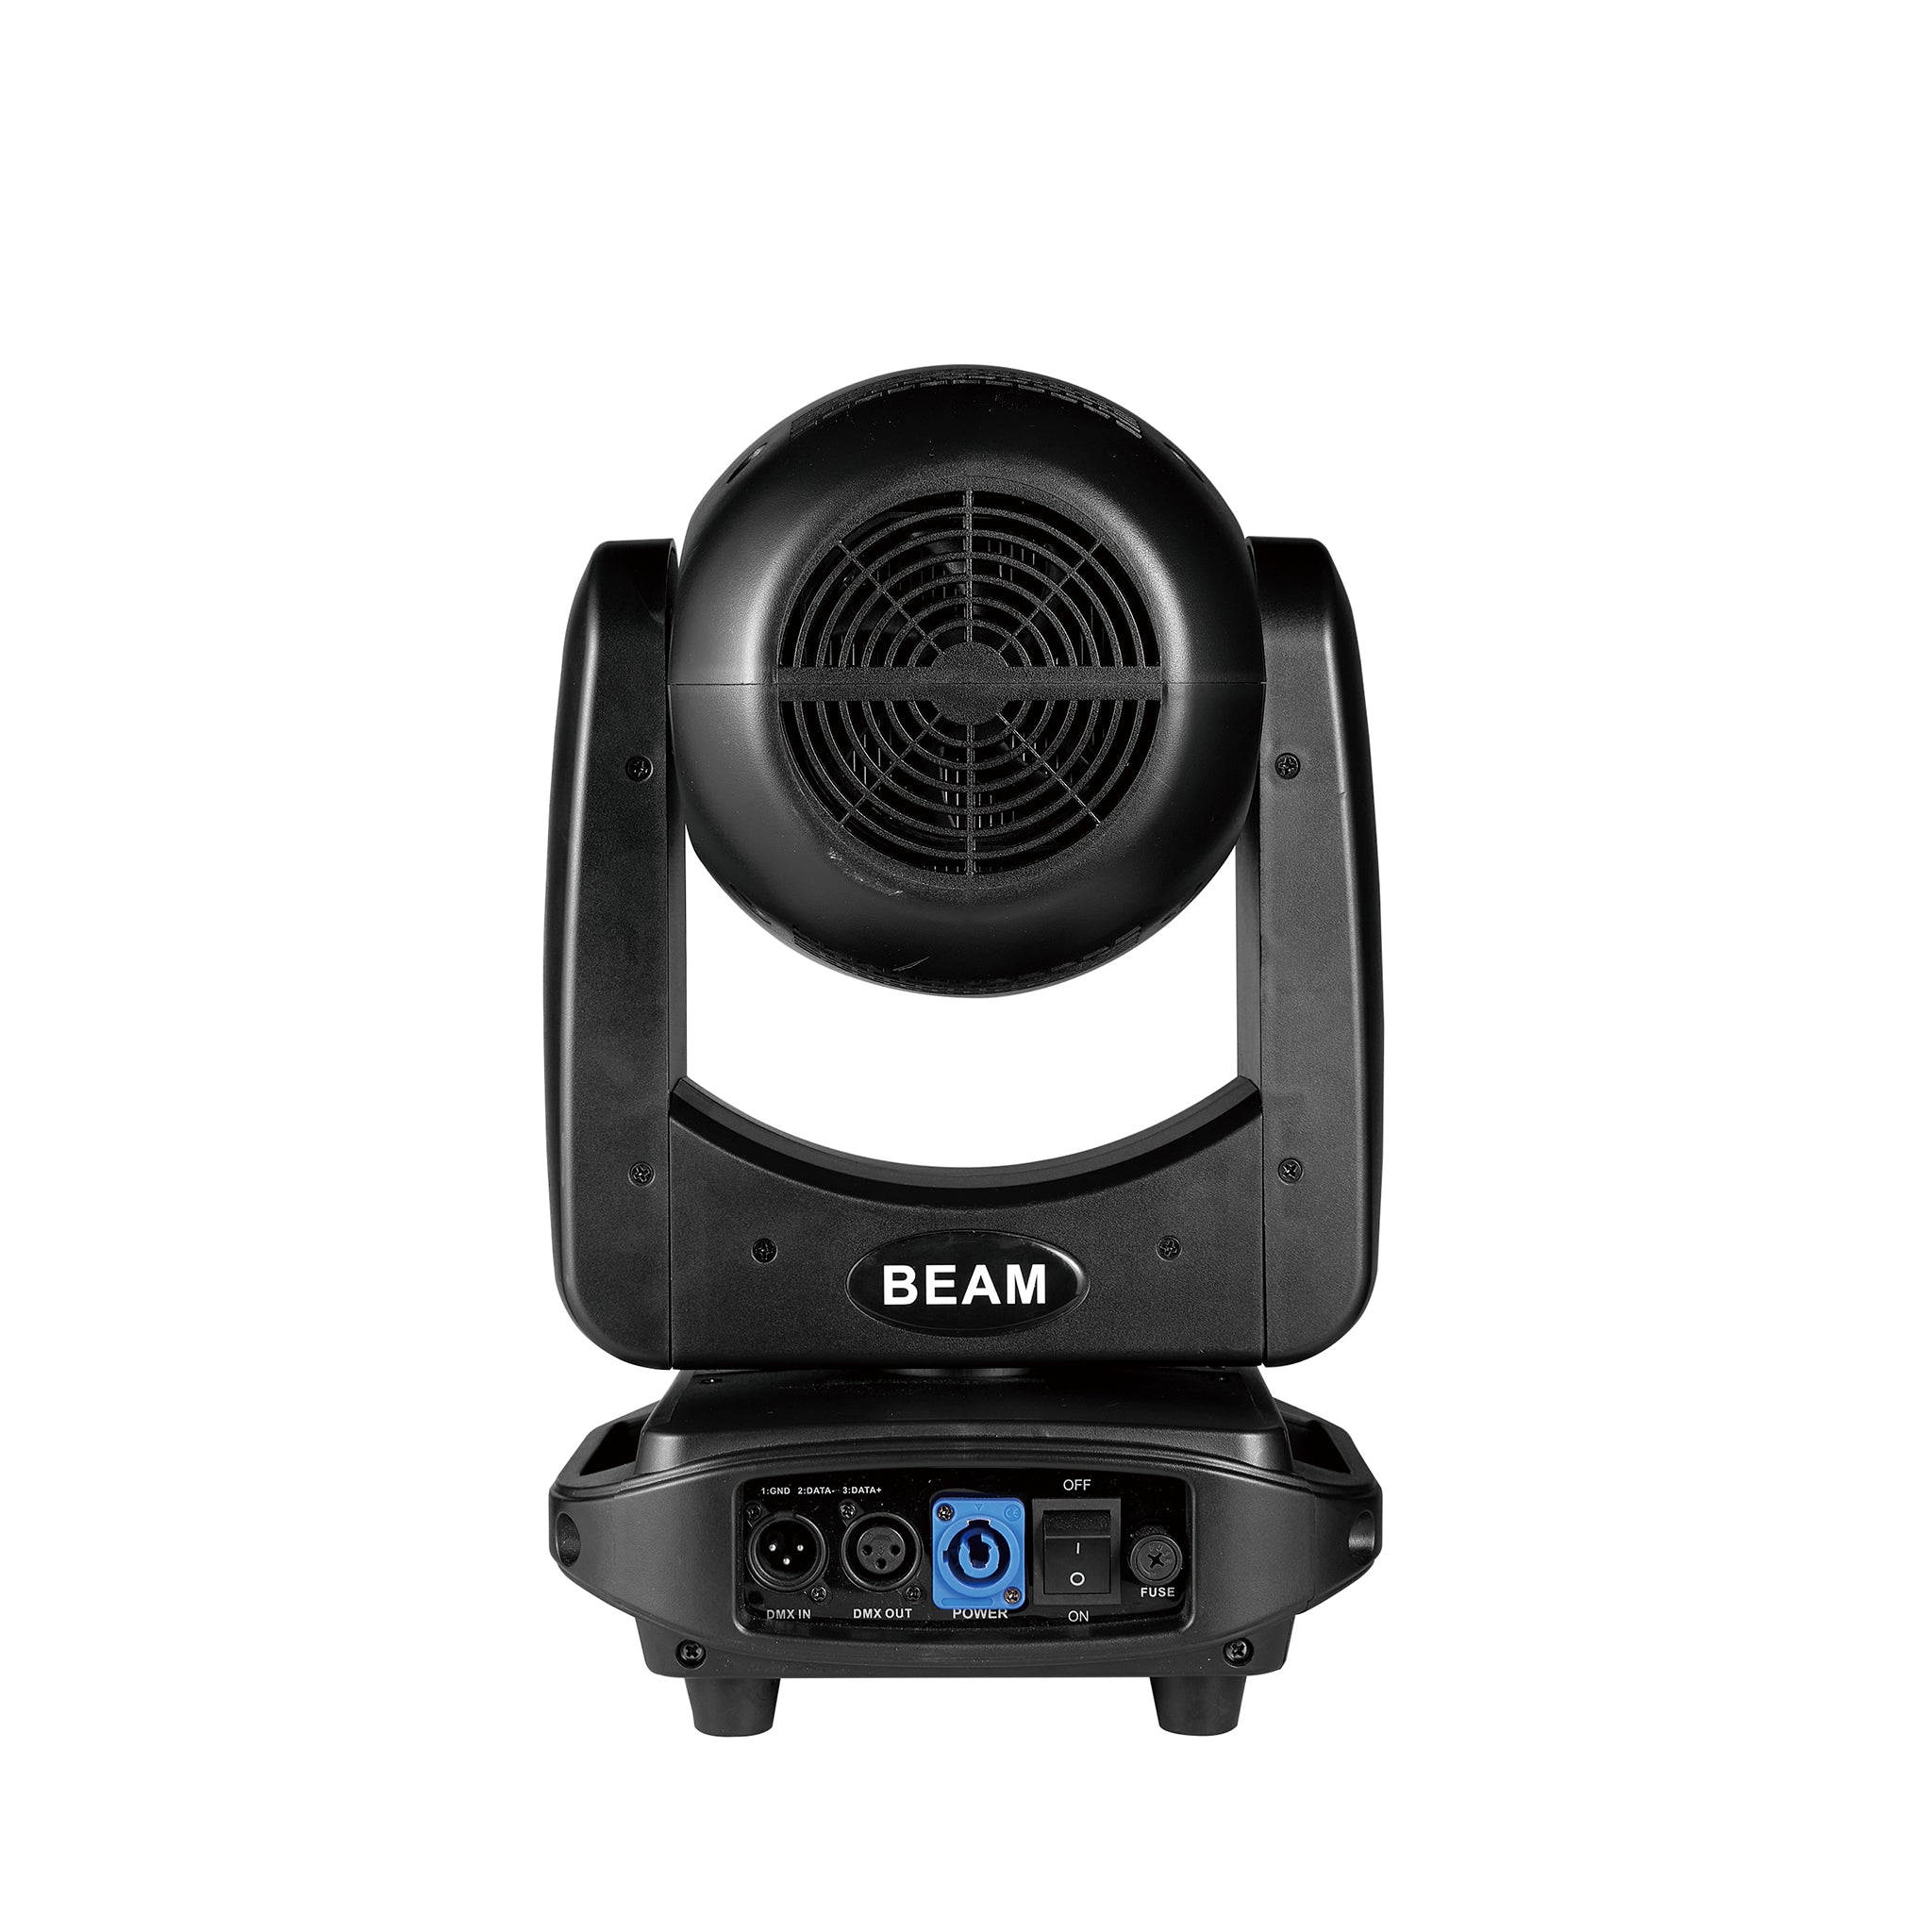 LED150W beam light-with aperture